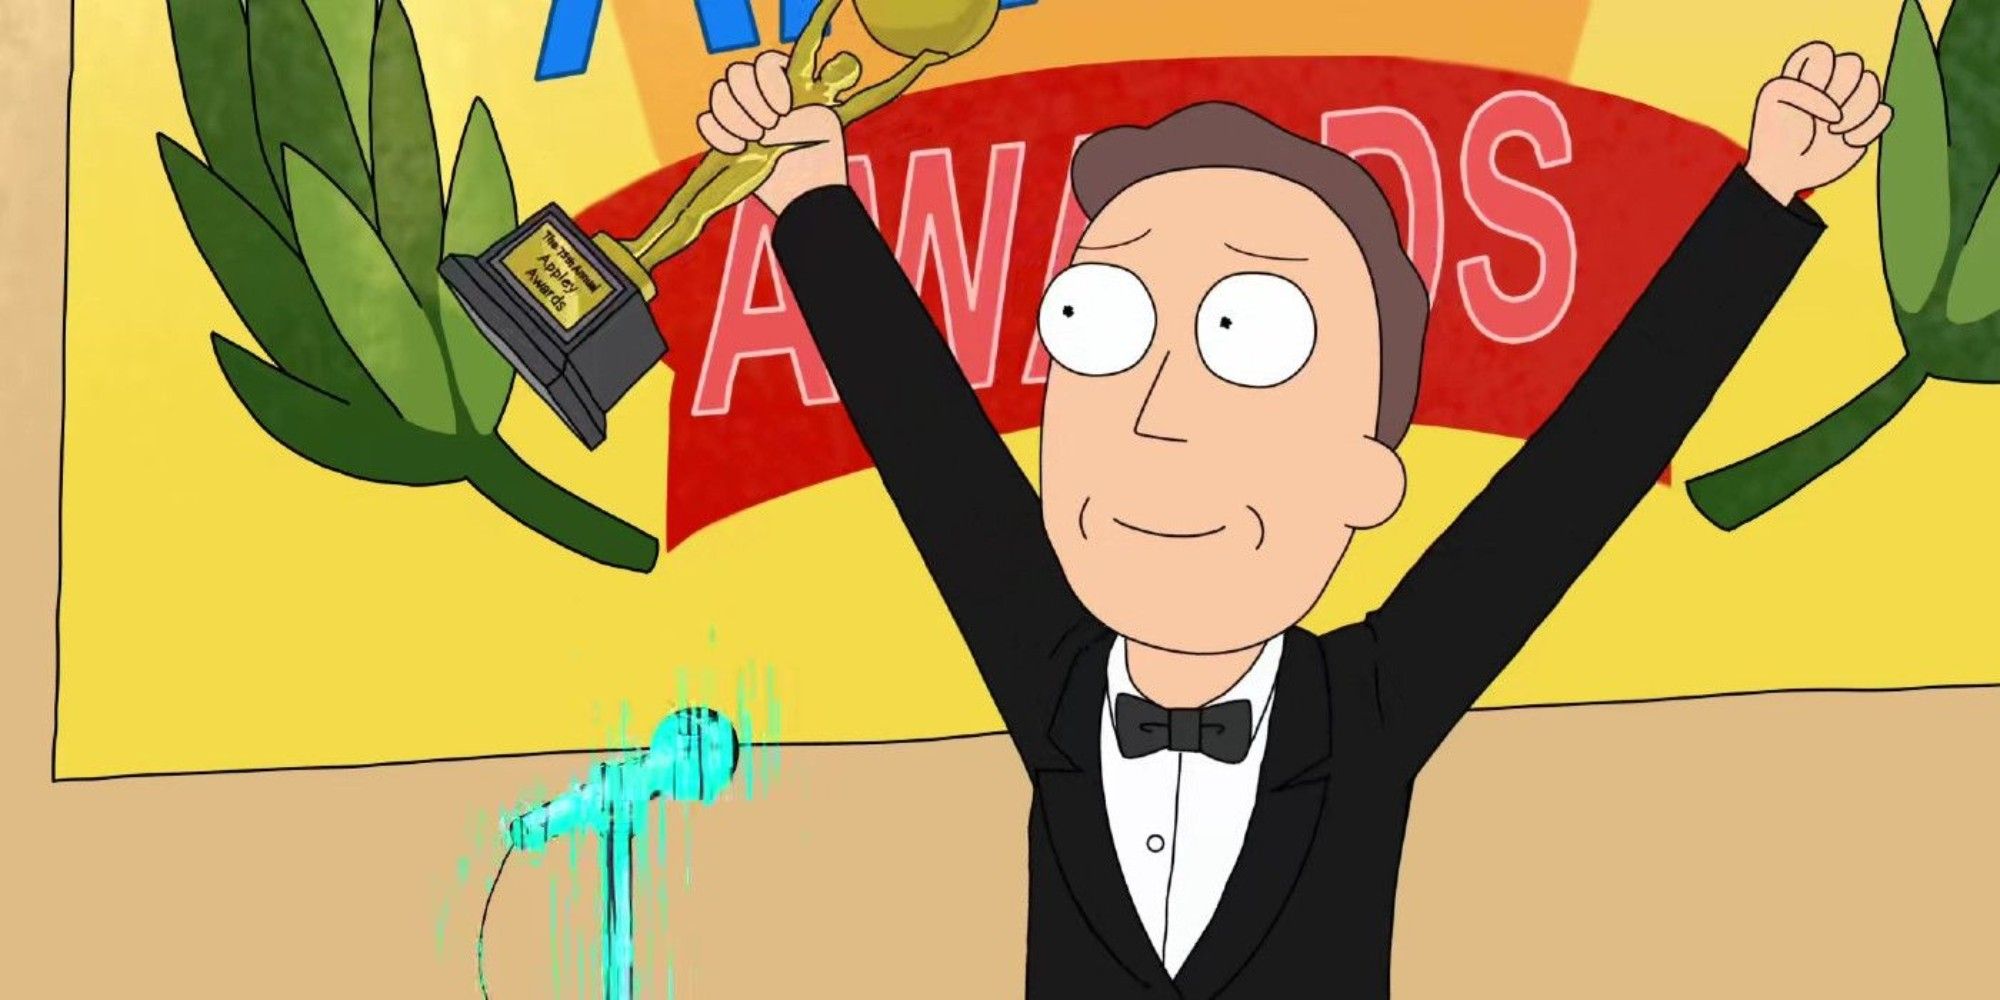 Chris-Parnell-as-Jerry-Smith-Celebrating-in-Rick-and-Morty